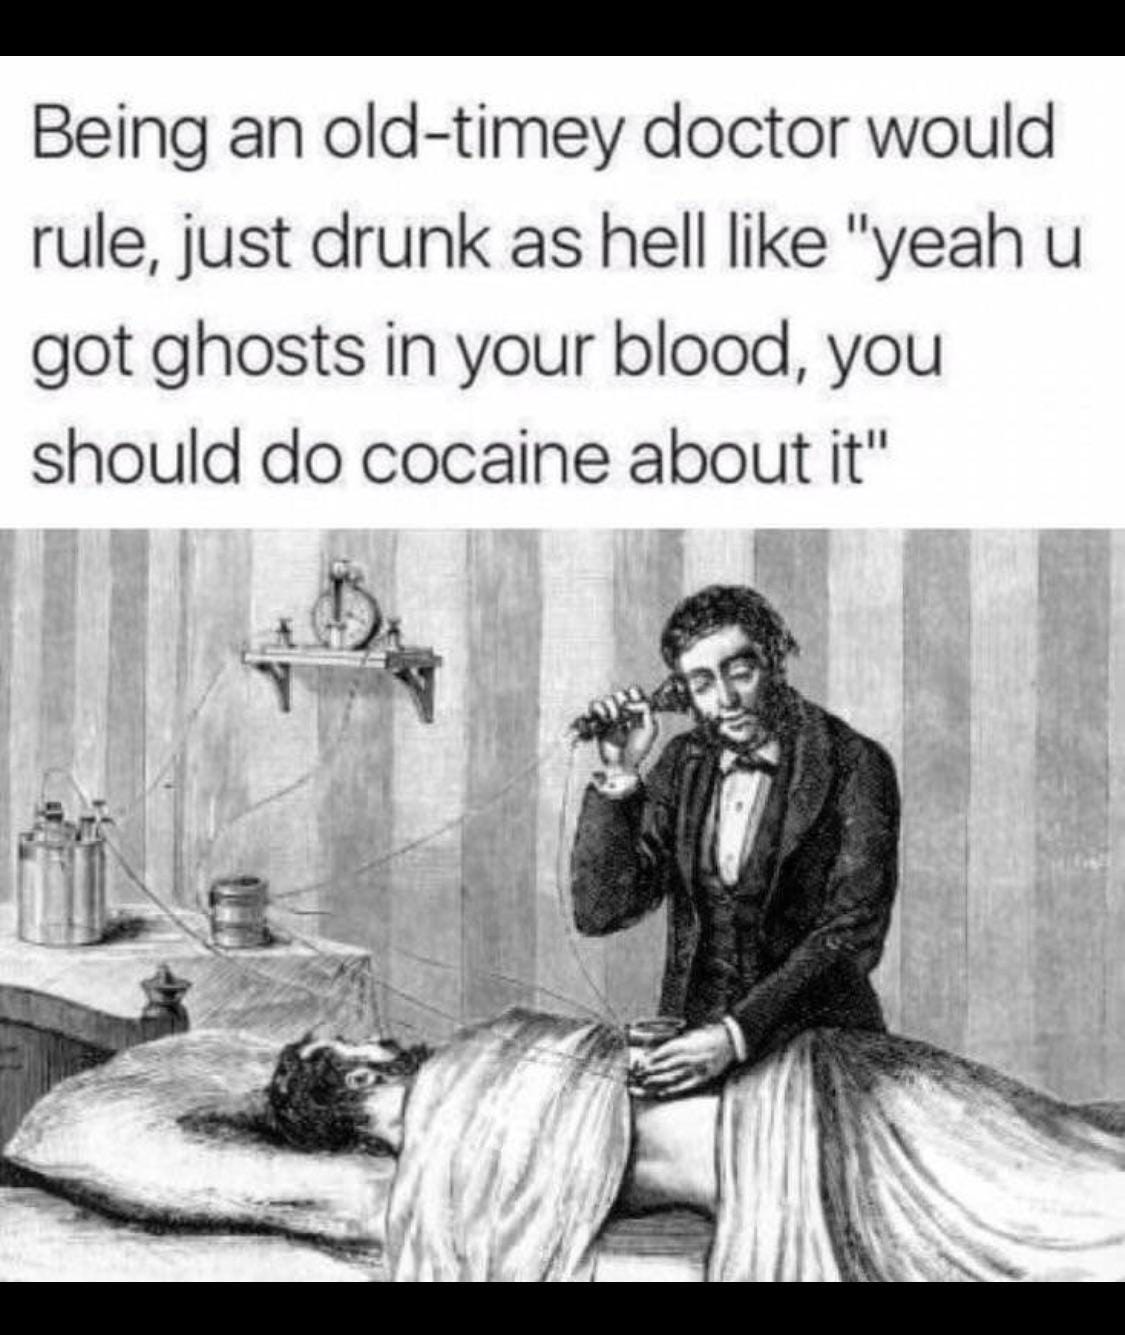 Doctors back in the day : r/funny